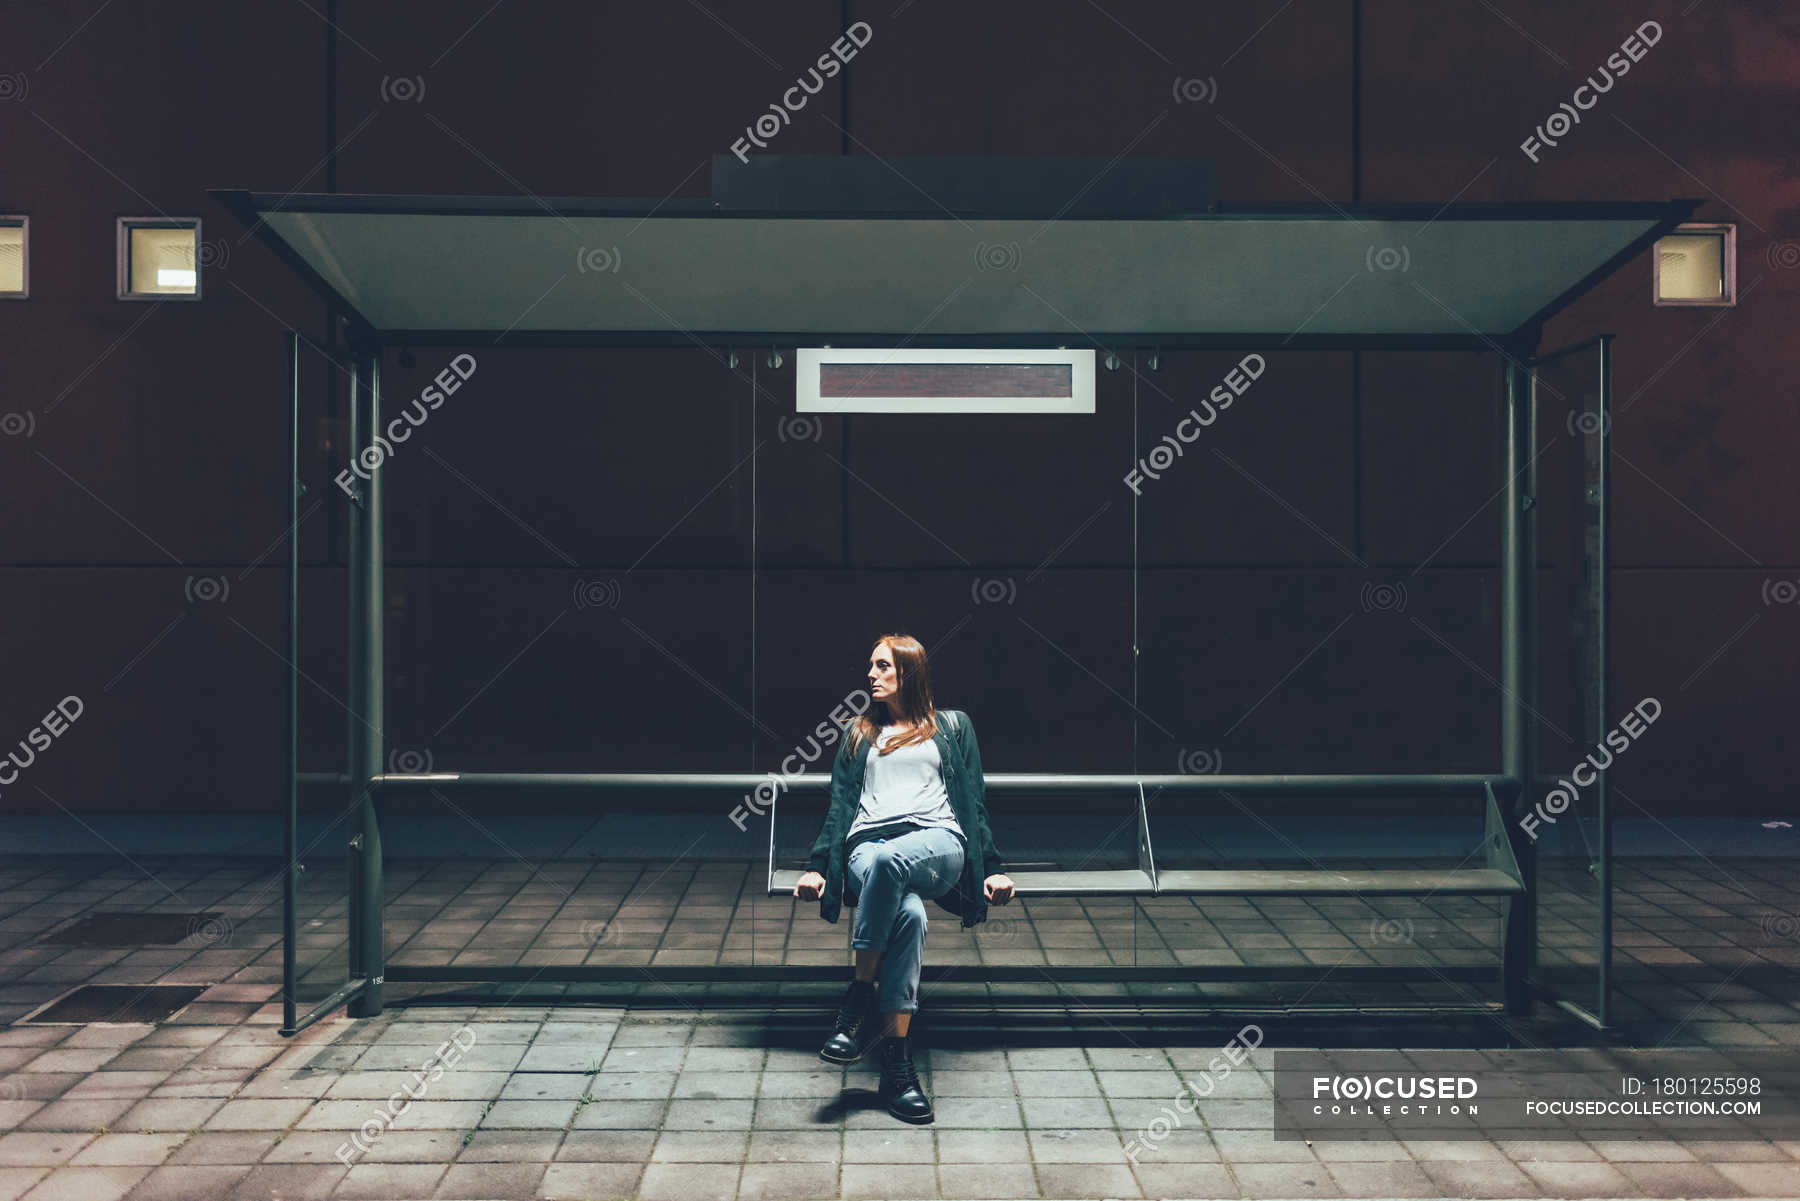 at the bus stop